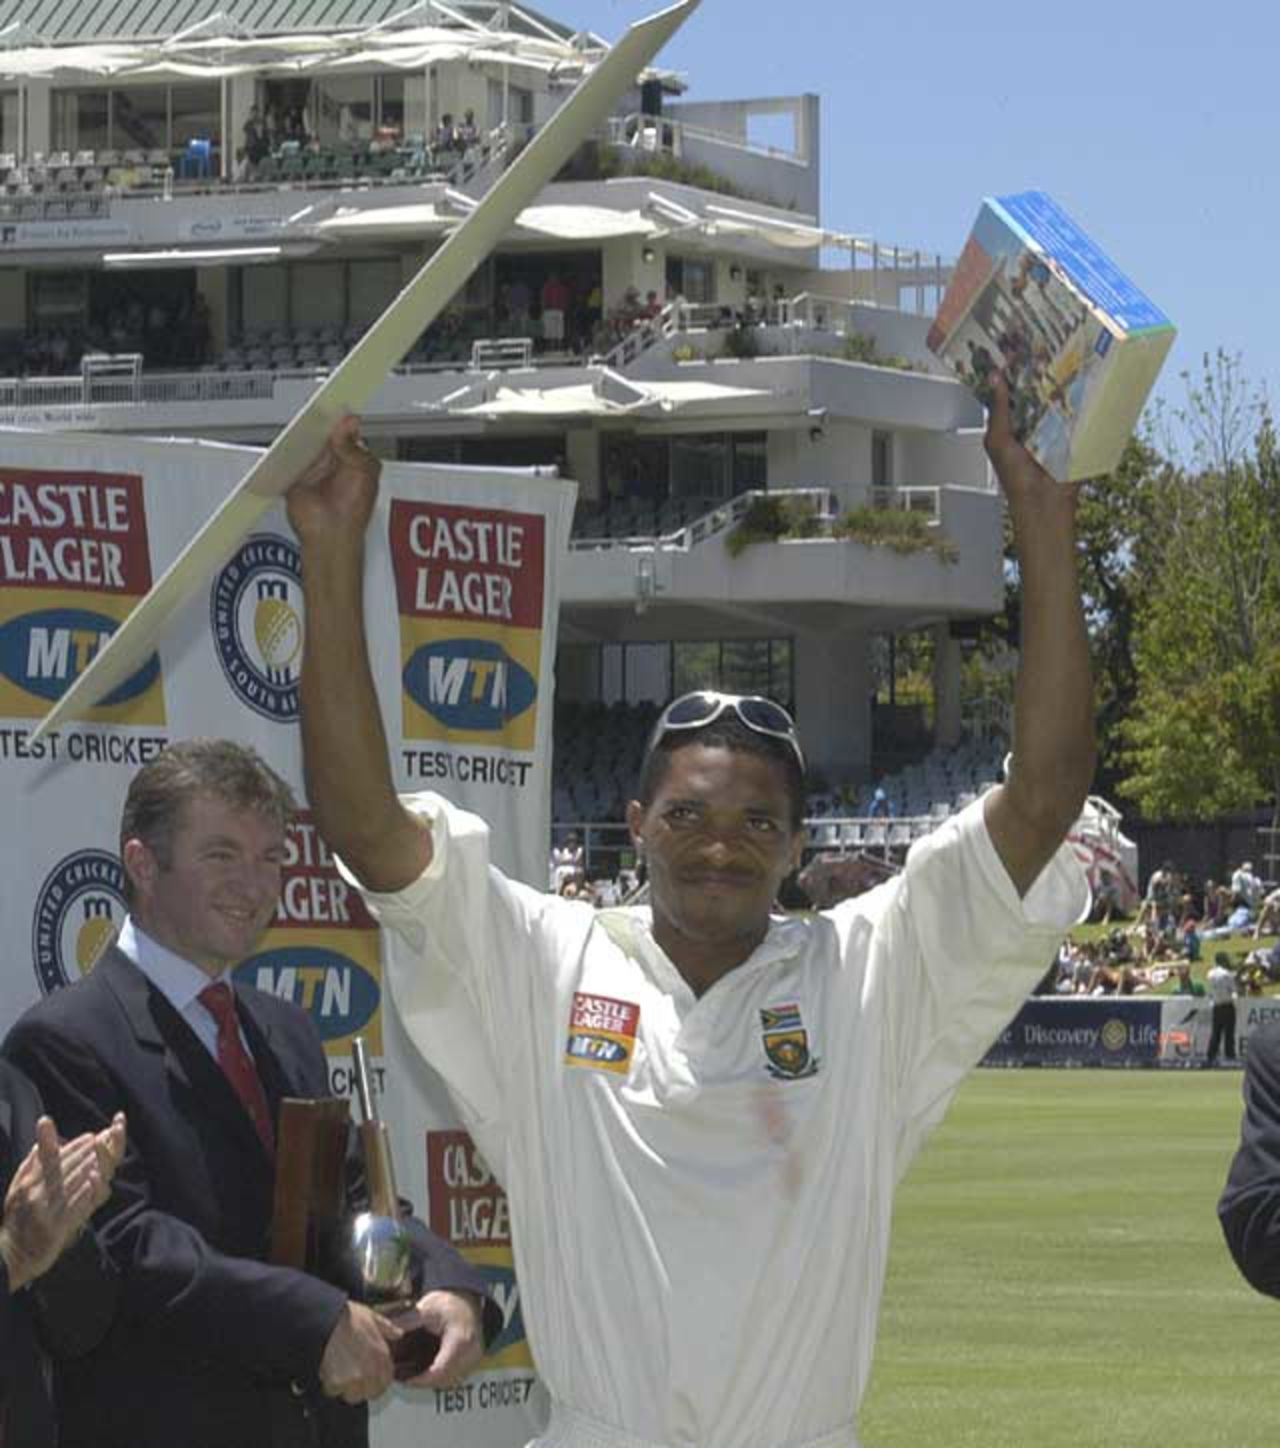 Makhaya Ntini with the Man of the Series award against Pakistan